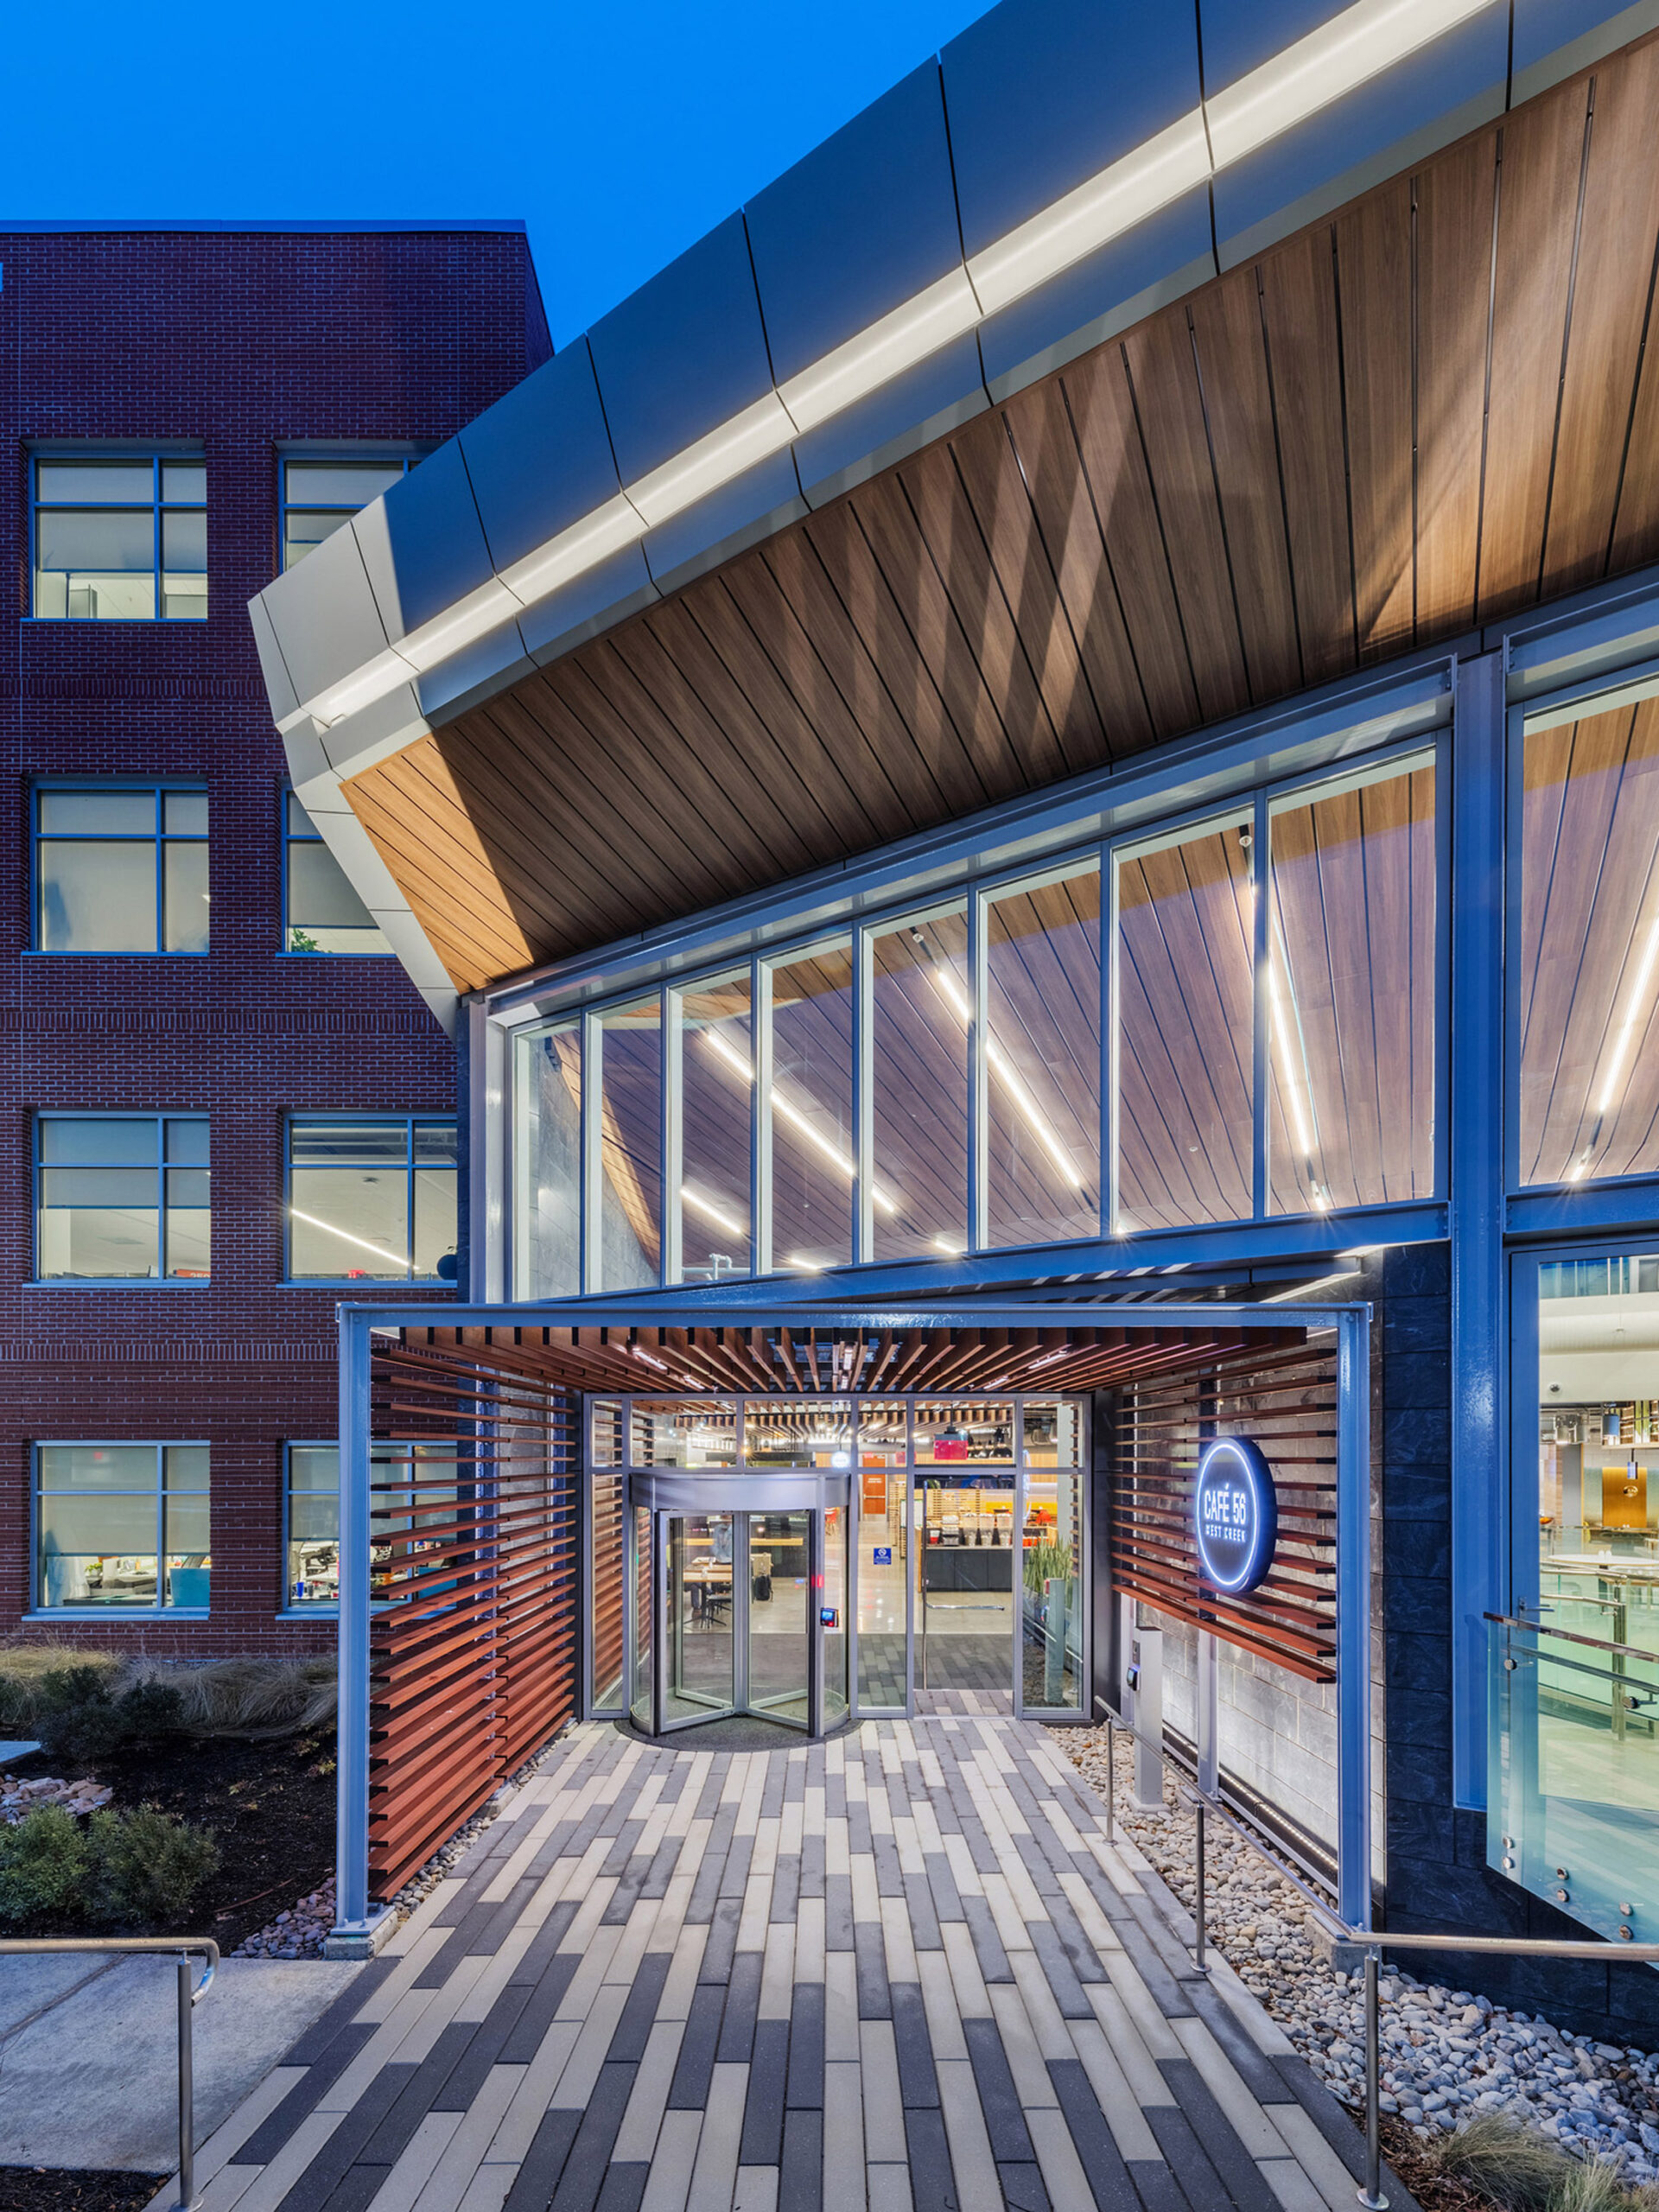 Modern architectural design featuring a building with distinctive brickwork and a curved, wood-paneled overhang leading to a glass entrance, illuminated by sleek, exterior lighting at twilight.